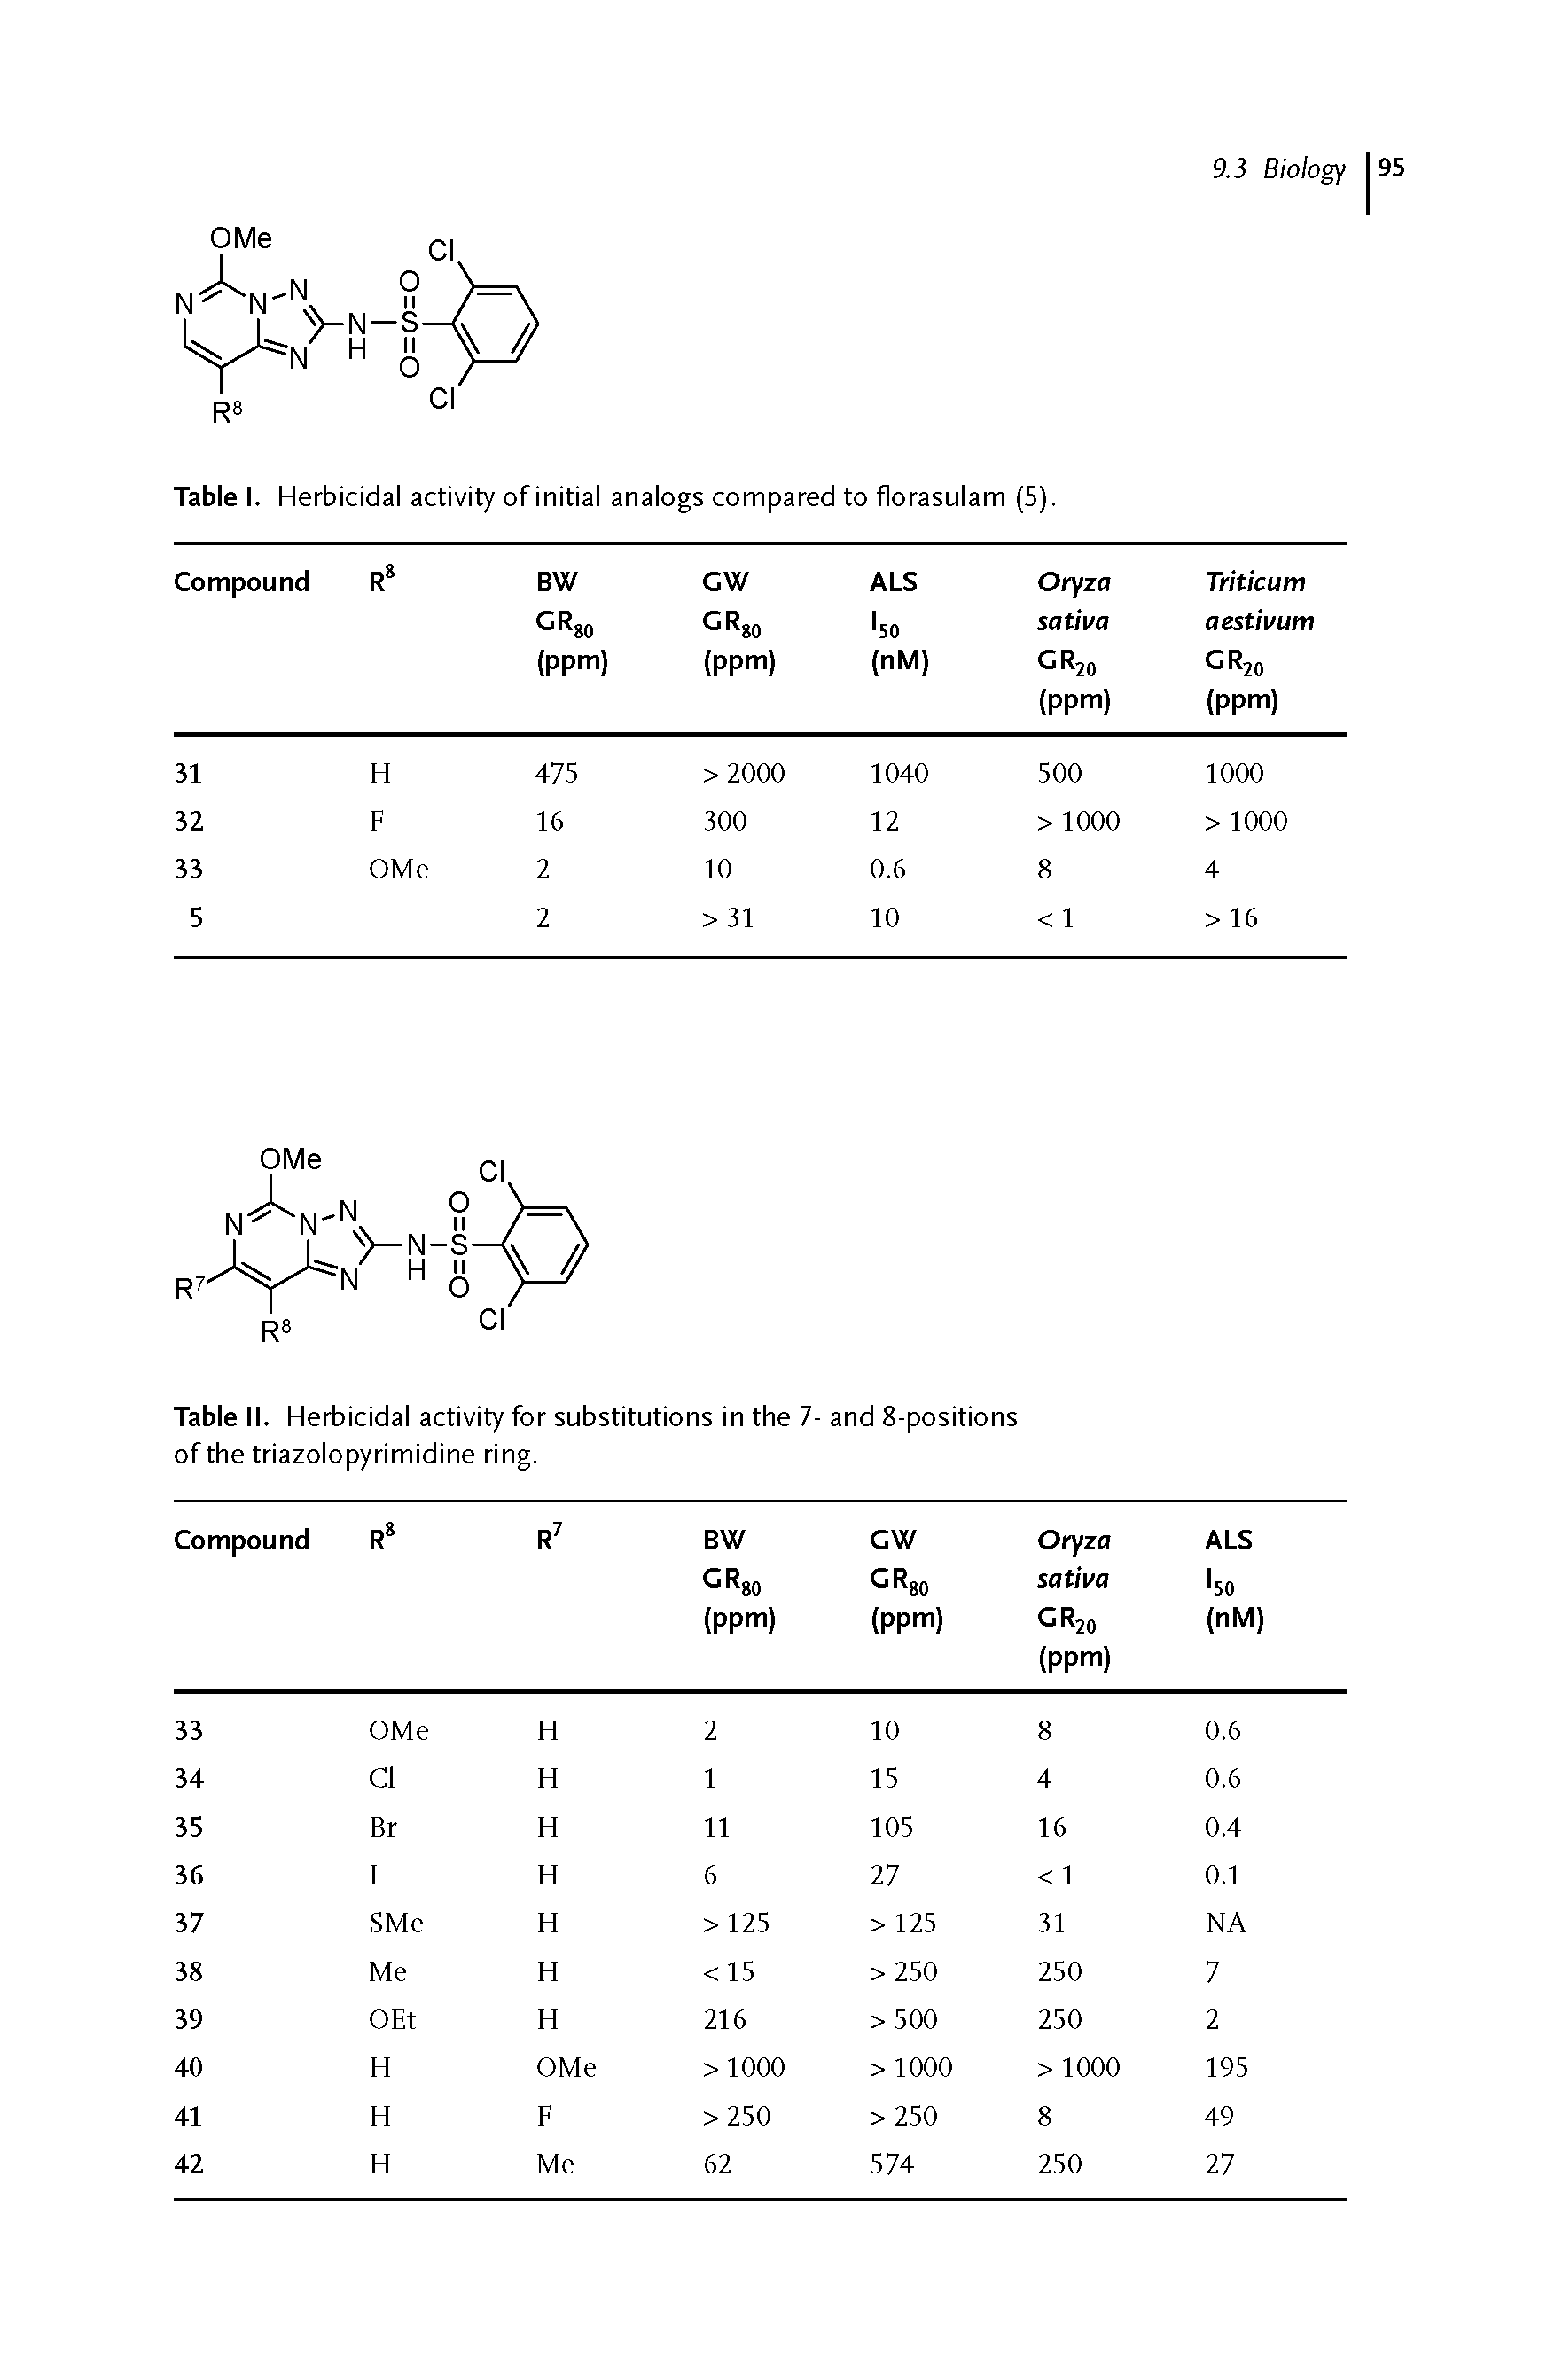 Table II. Herbicidal activity for substitutions in the 7- and 8-positions of the triazolopyrimidine ring.